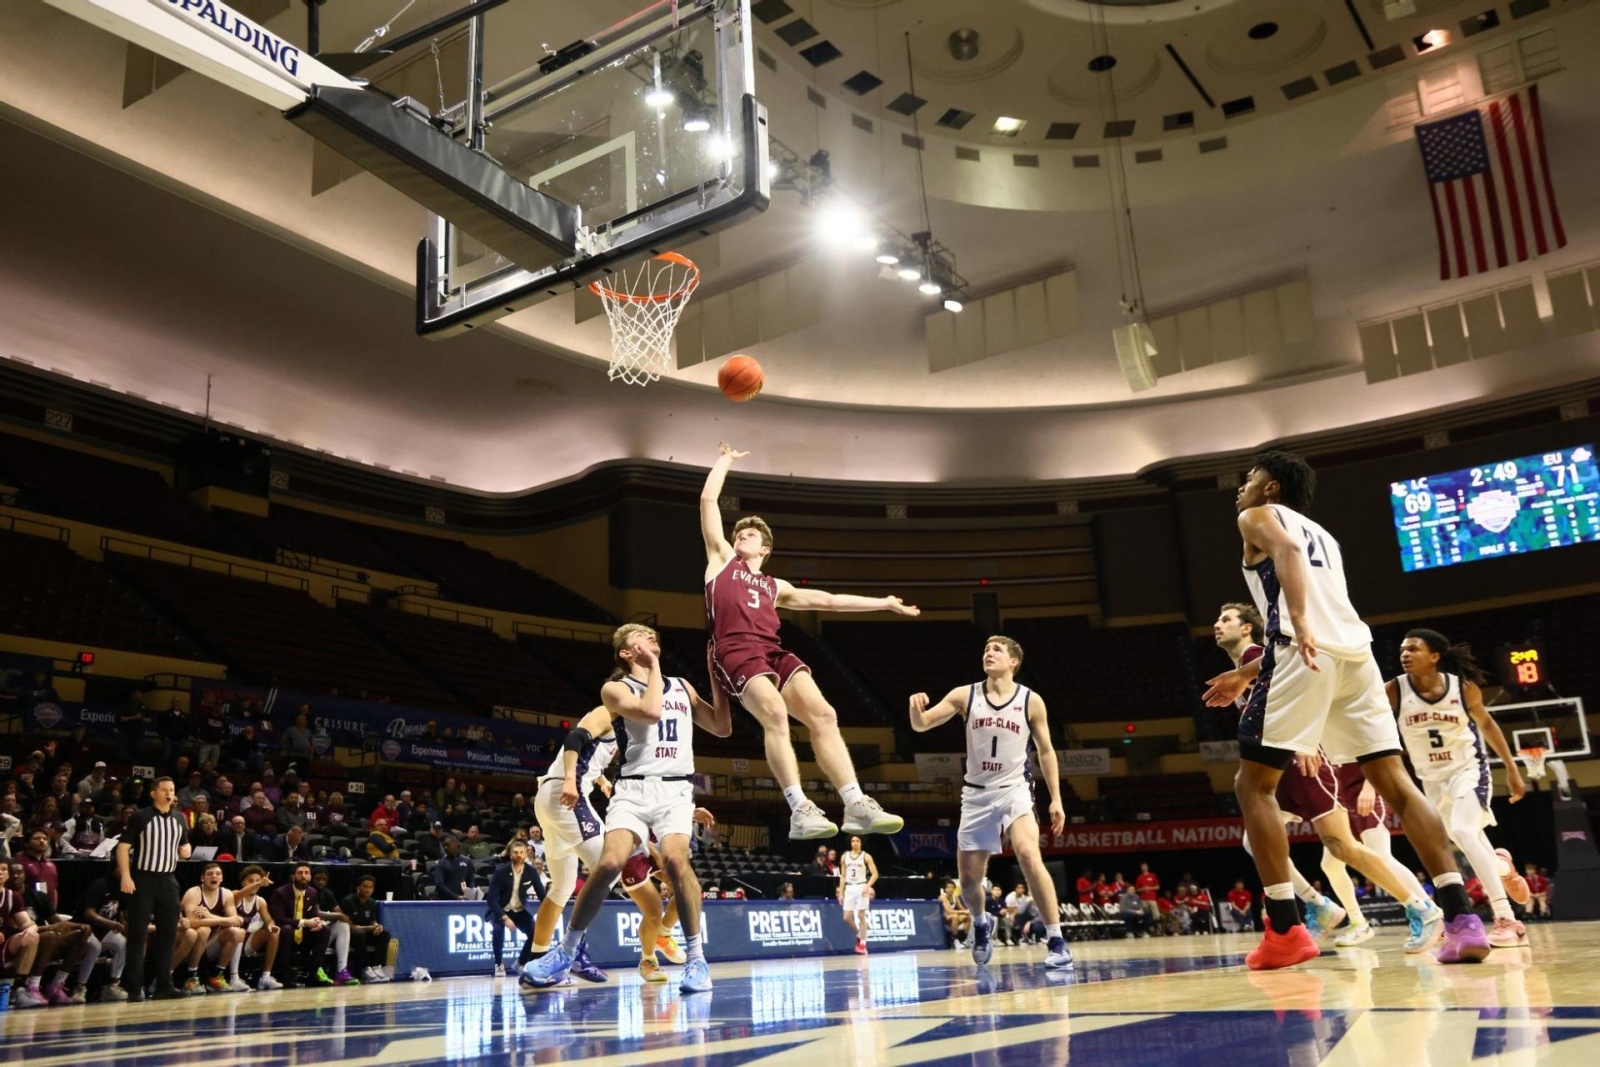 Garrett Davault goes up for two of his team-leading 22 points in Evangel’s NAIA National Tournament victory over Lewis-Clark at Municipal Auditorium in Kansas City. Evangel prevailed 77-74. (Photo by Evangel University Athletics)